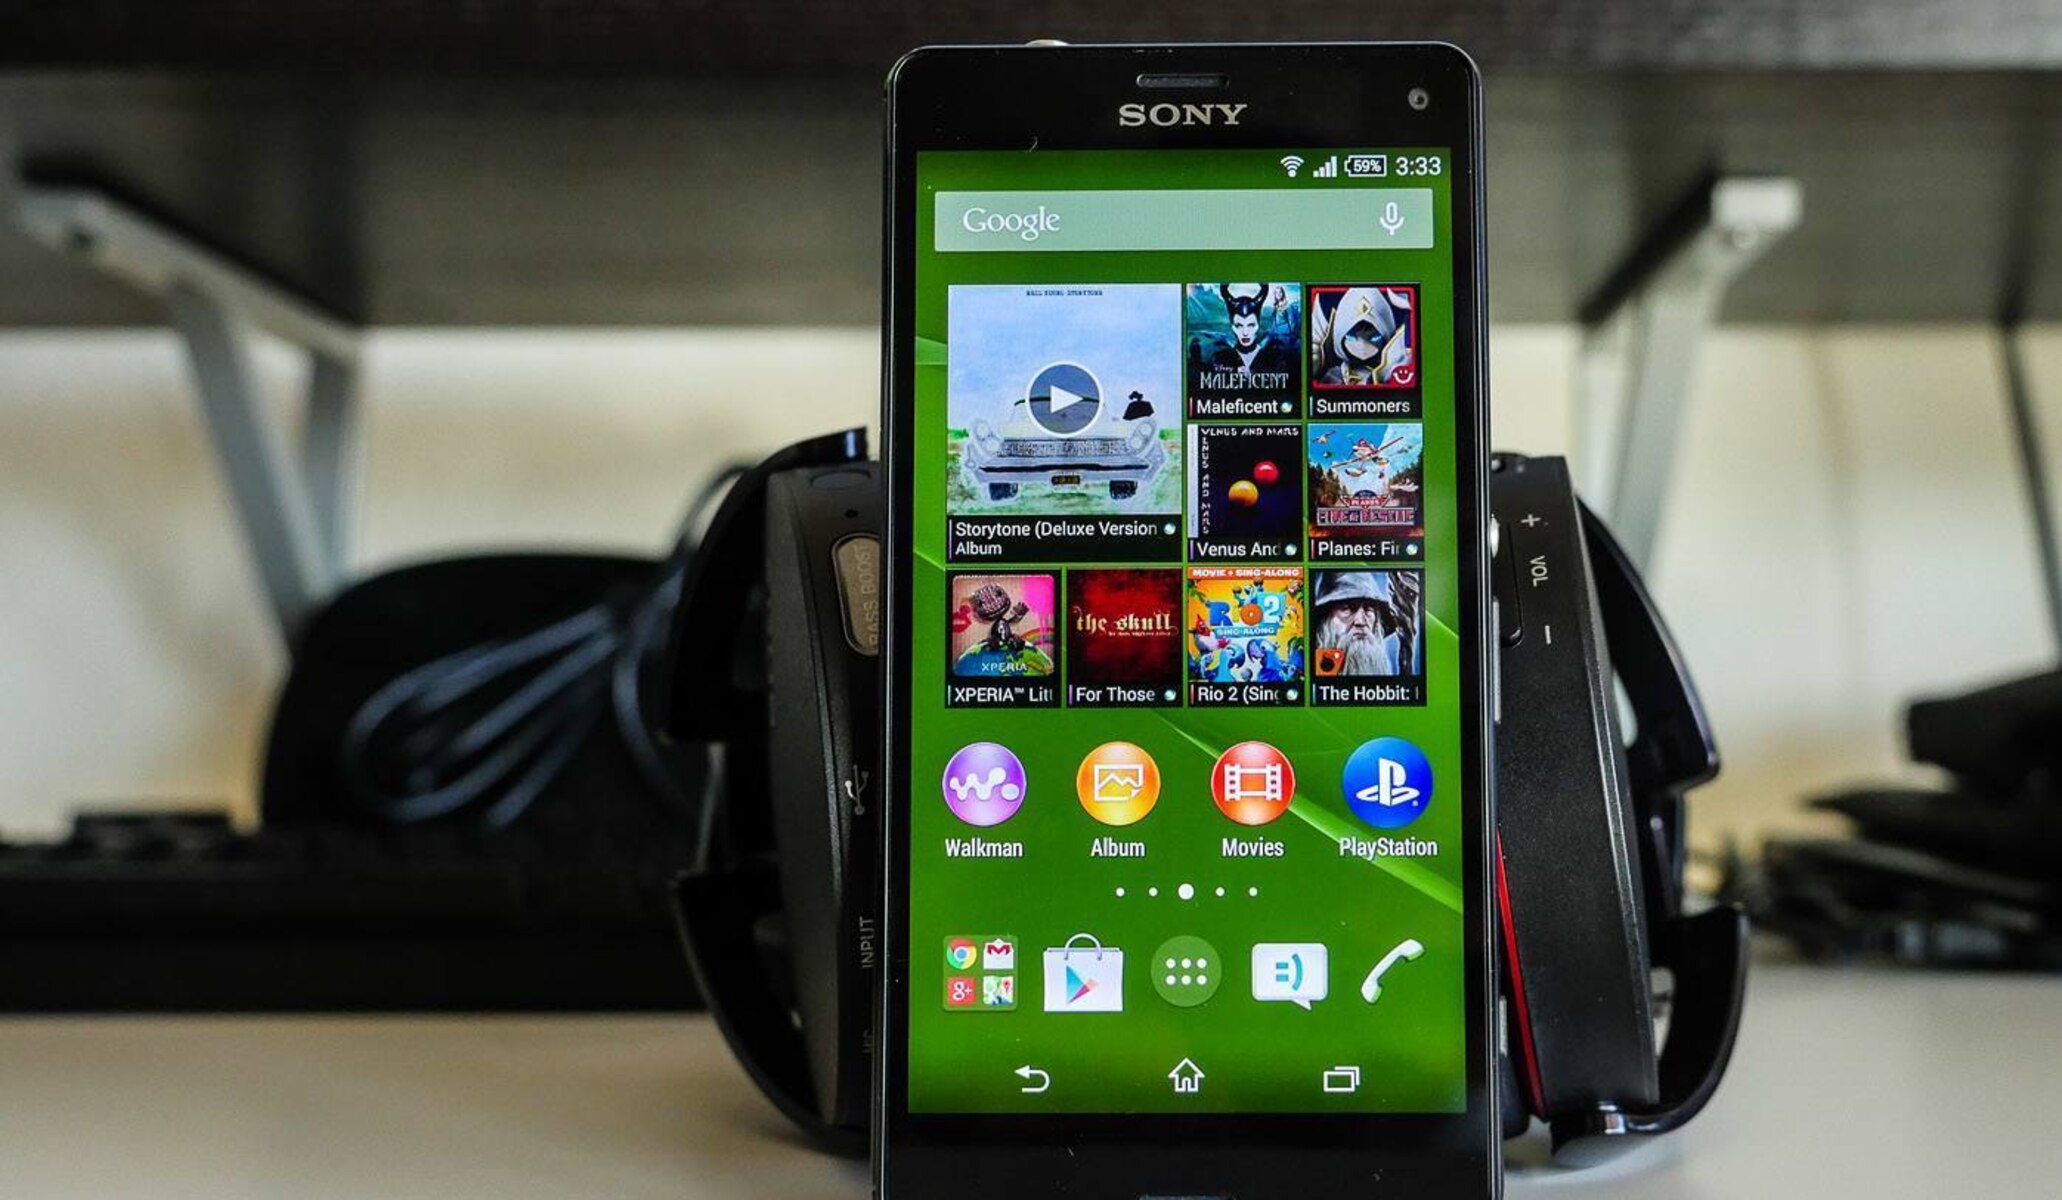 Syncing Music To Your Sony Xperia Z3